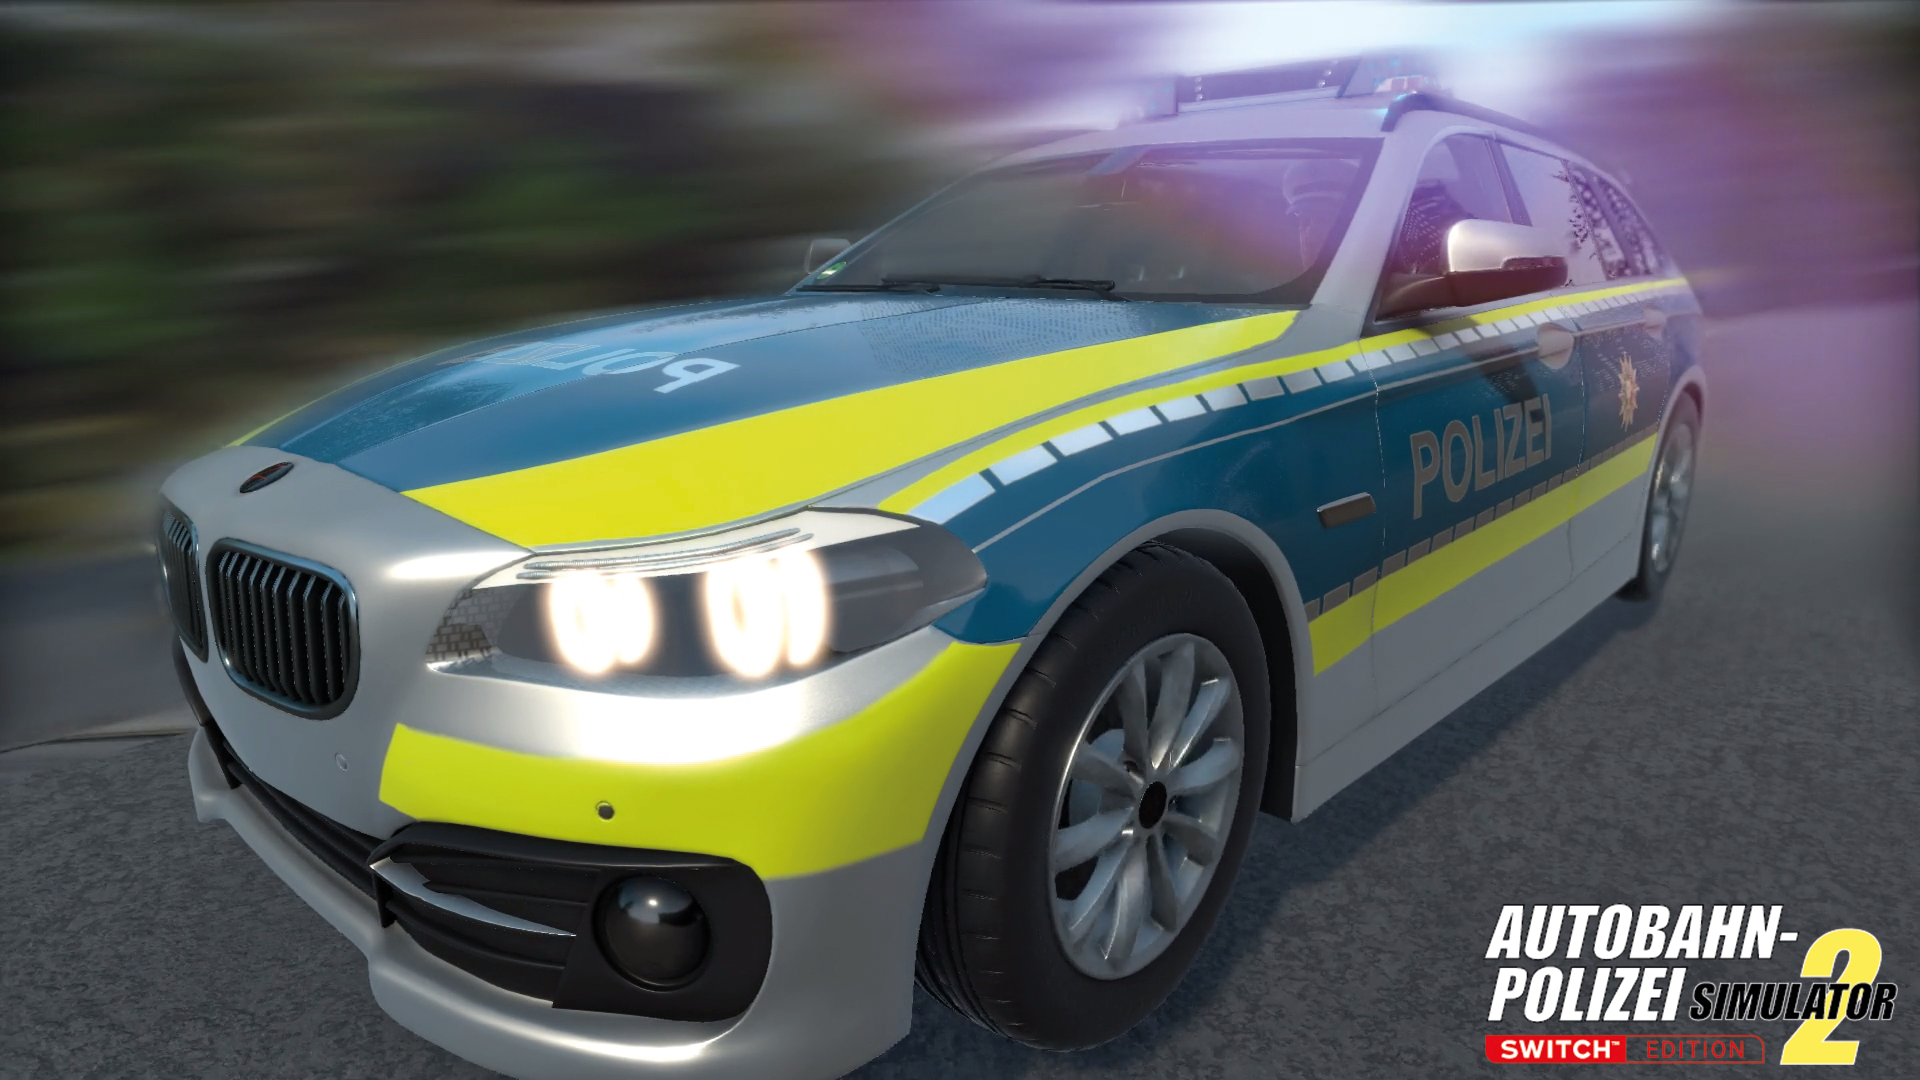 autobahn-police-simulator-2-out-now-for-nintendo-switch